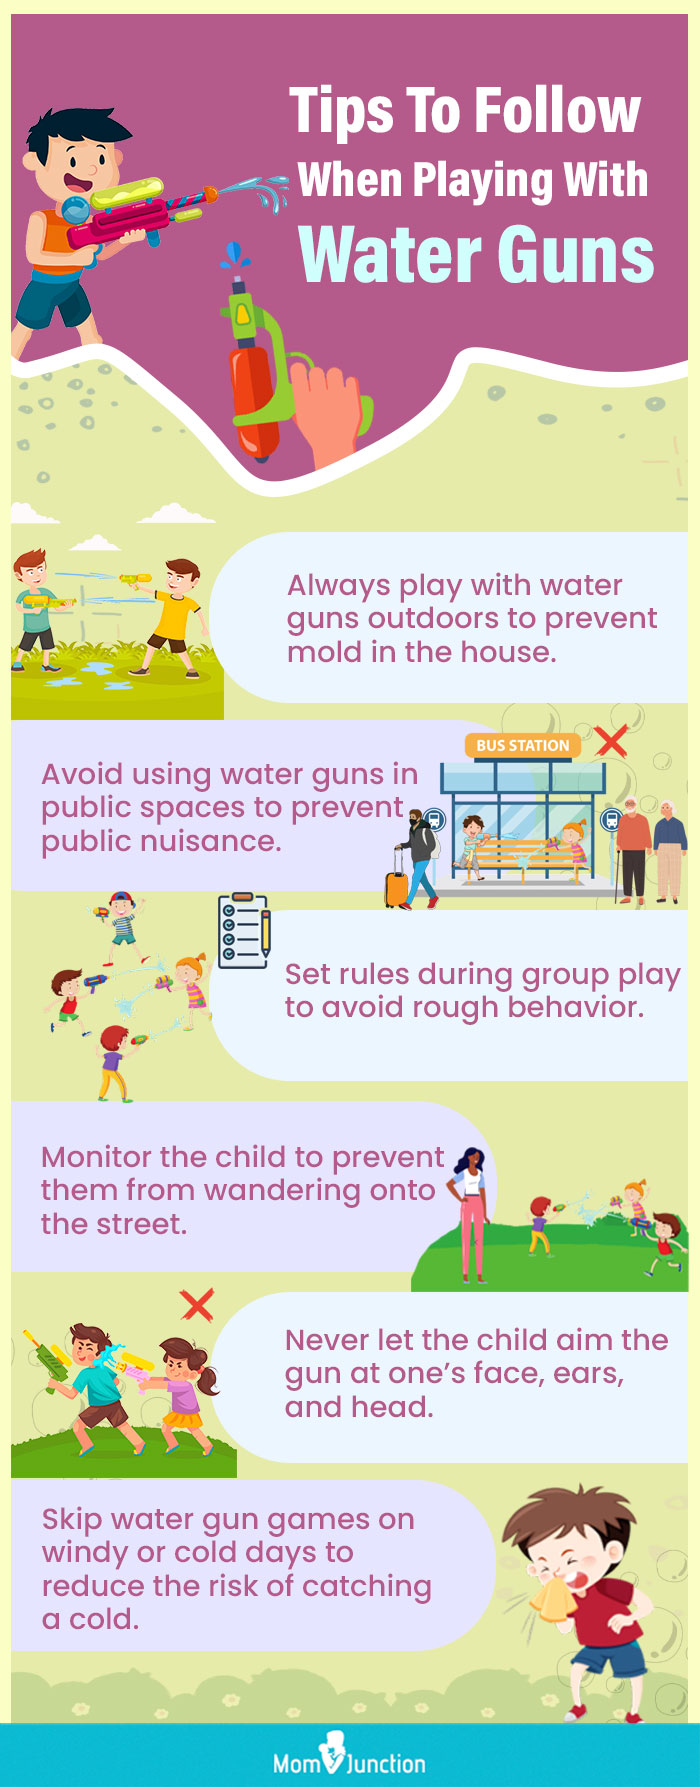 Tips To Follow When Playing With Water Guns (infographic)